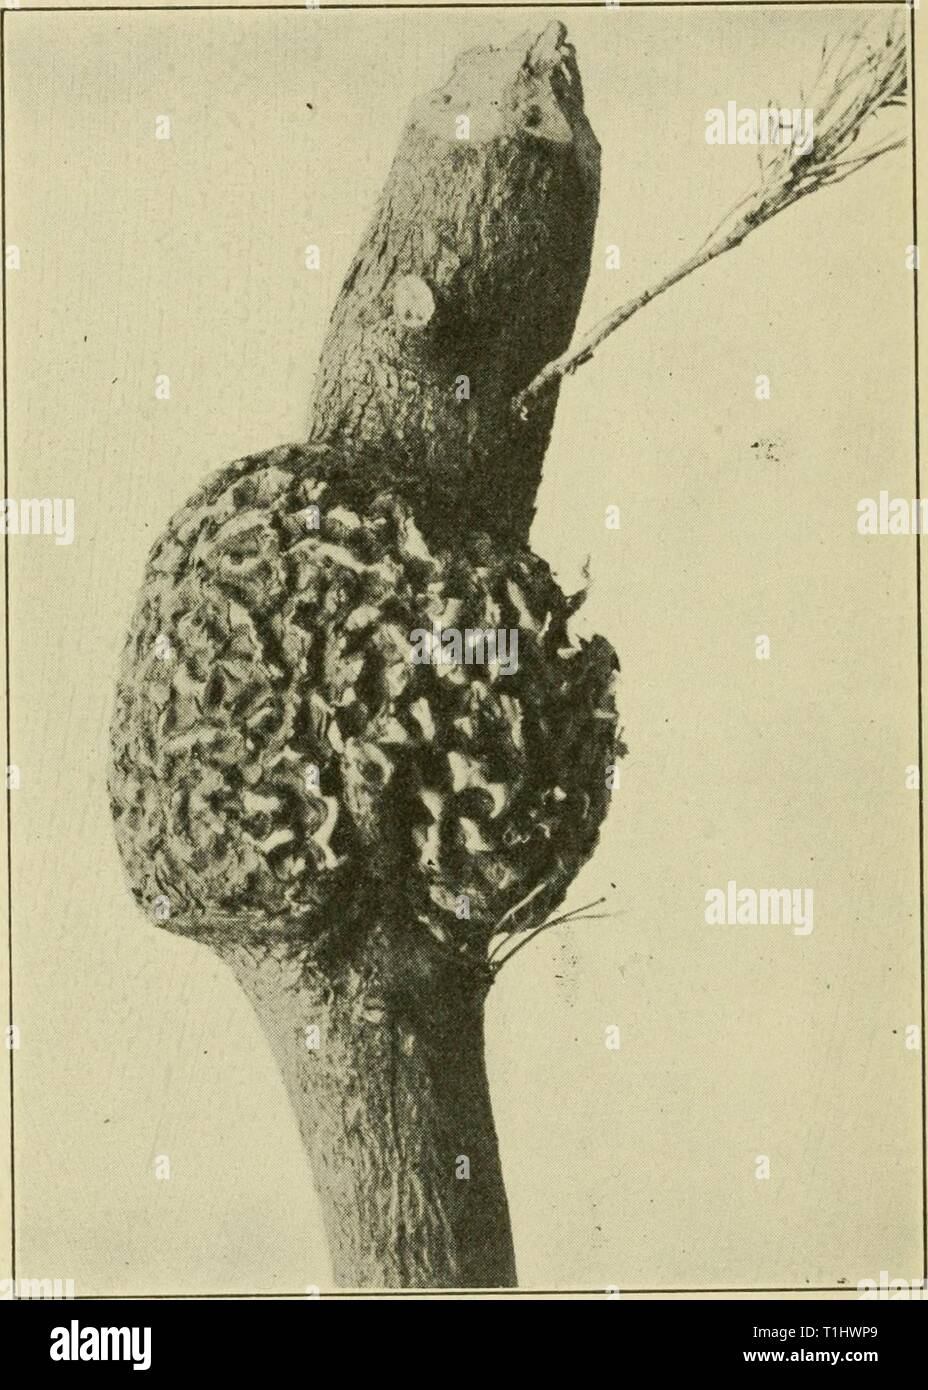 Diseases of economic plants (1921) Diseases of economic plants  diseasesofeconom01stev Year: 1921  400 Diseases of Economic Plants Rust (Cronartium cerebrum (Pk.) H. & L., Peridermium). — Swollen areas occur upon the branches and young stems which are gradually killed. The gall-like growth sheds a    Fig. 212.  Gall produced by Cronartium (Perider- mium) cerebrum on pine. After Hedgcock. profusion of orange-colored spores each spring. Chiefly by its interference with the sap current the swellings bring about the death of many trees. The galls are perennial and may Stock Photo